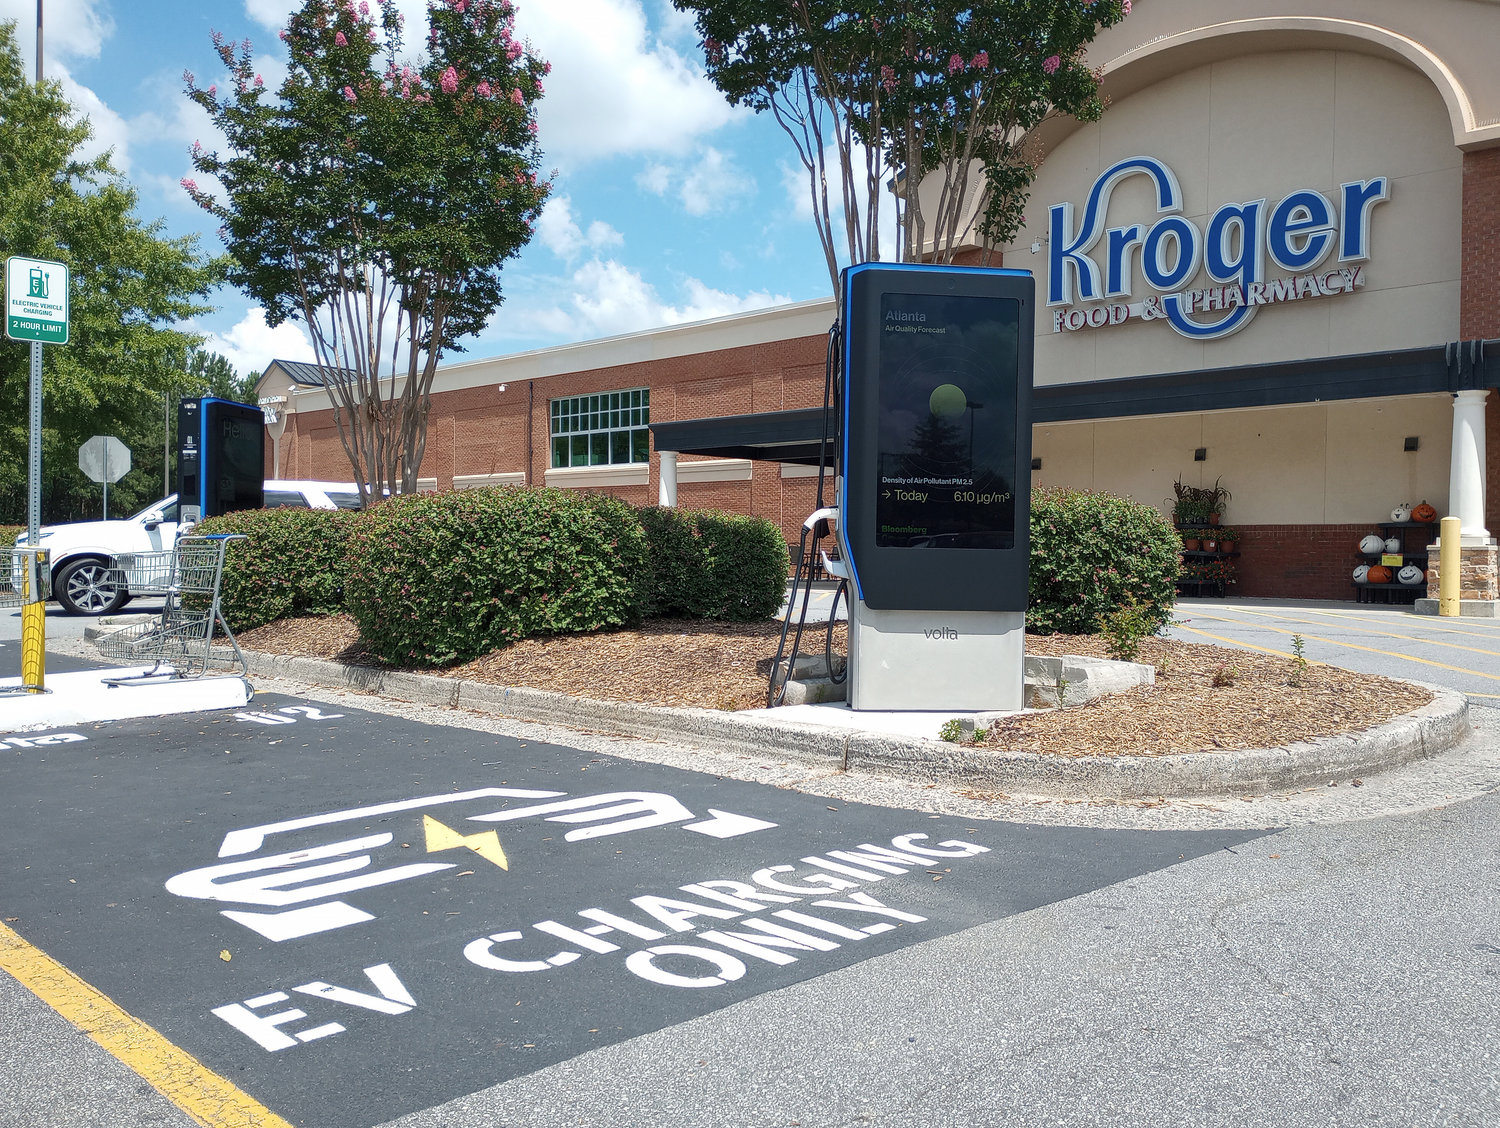 An electric vehicle charging station at a Kroger supermarket in Dallas, Ga. (Christian Index/Henry Durand, File)